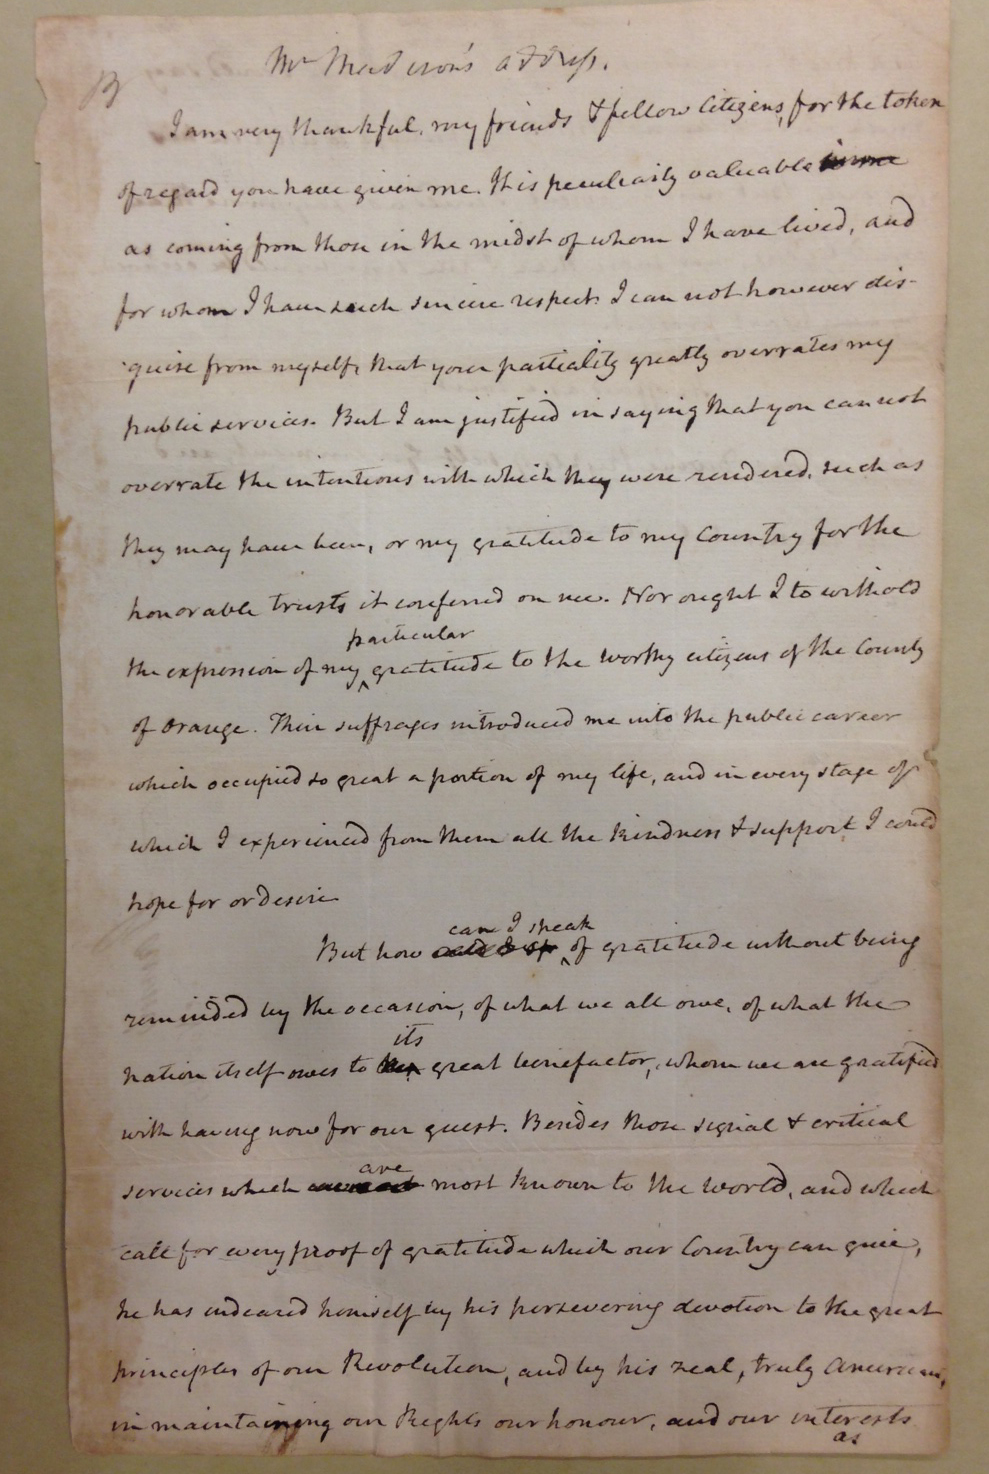 James Madison's remarks introducing Lafayette to the citizens of Orange, Va., November 25, 1824.   (MSS 4677)